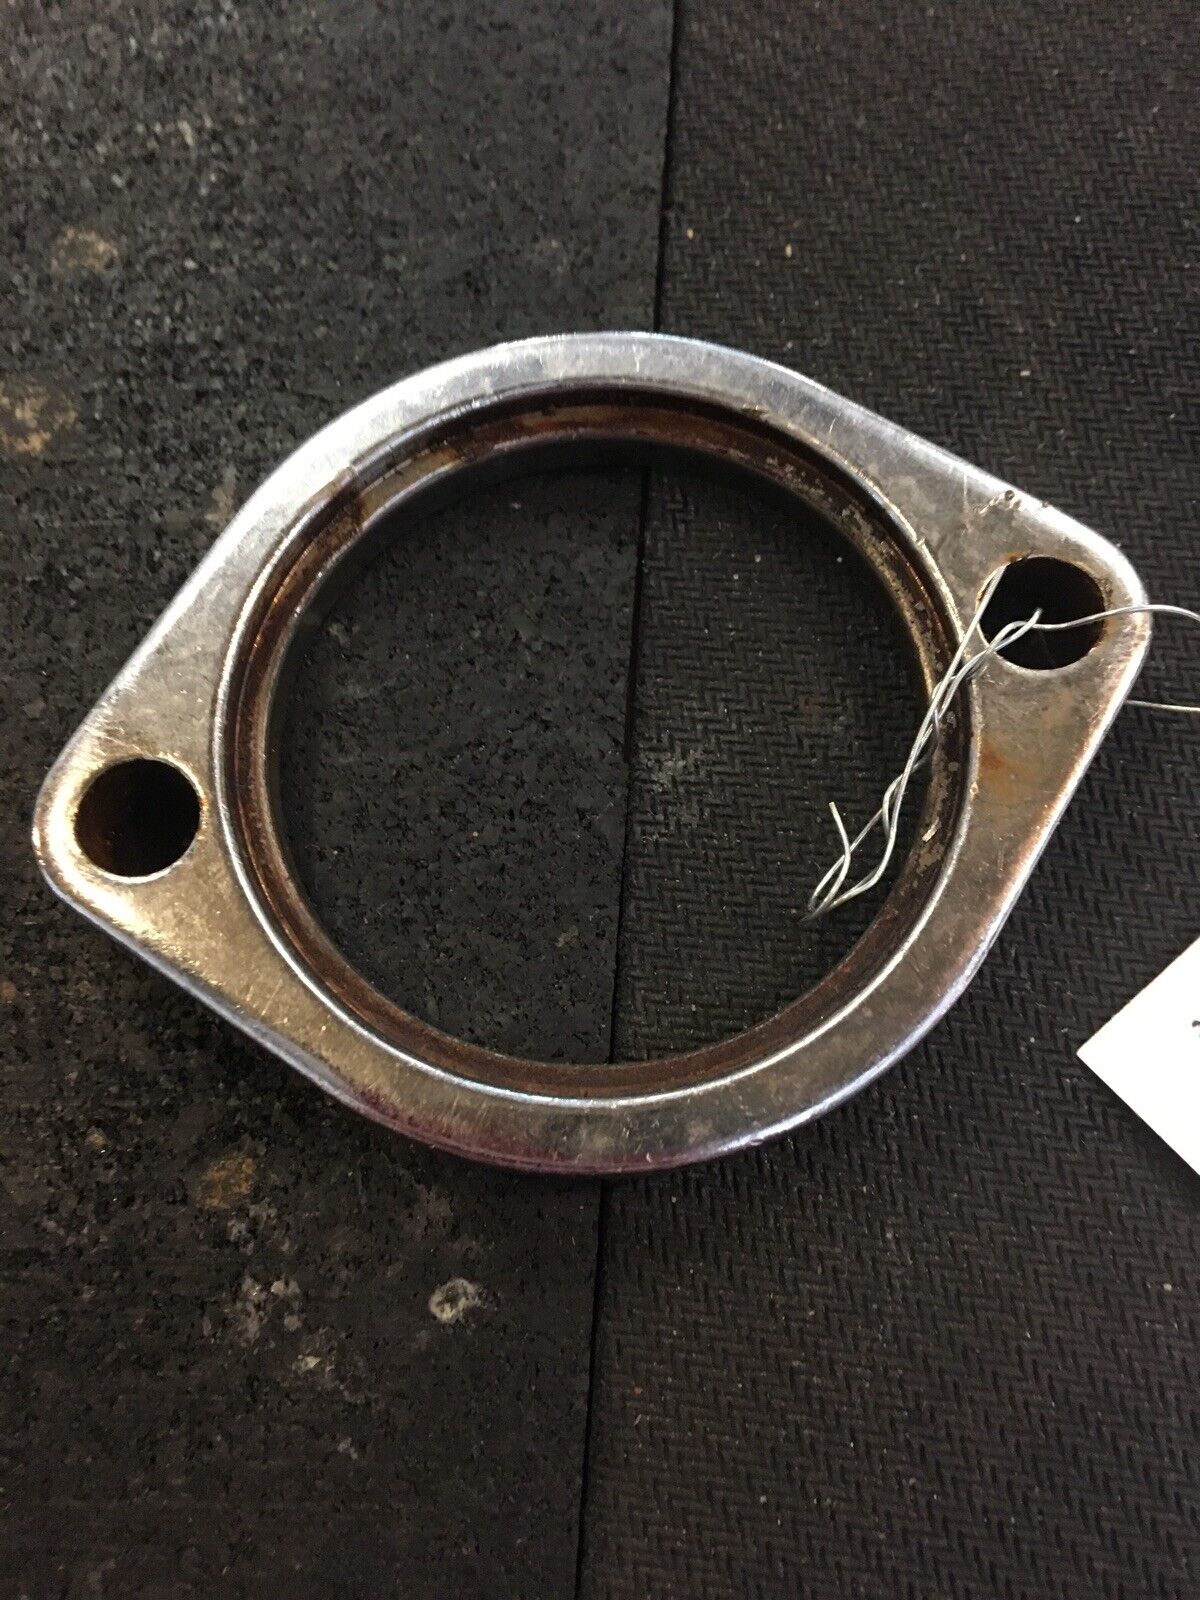 Harley Davidson Exhaust Flange #65328-83 - Knobtown Cycle